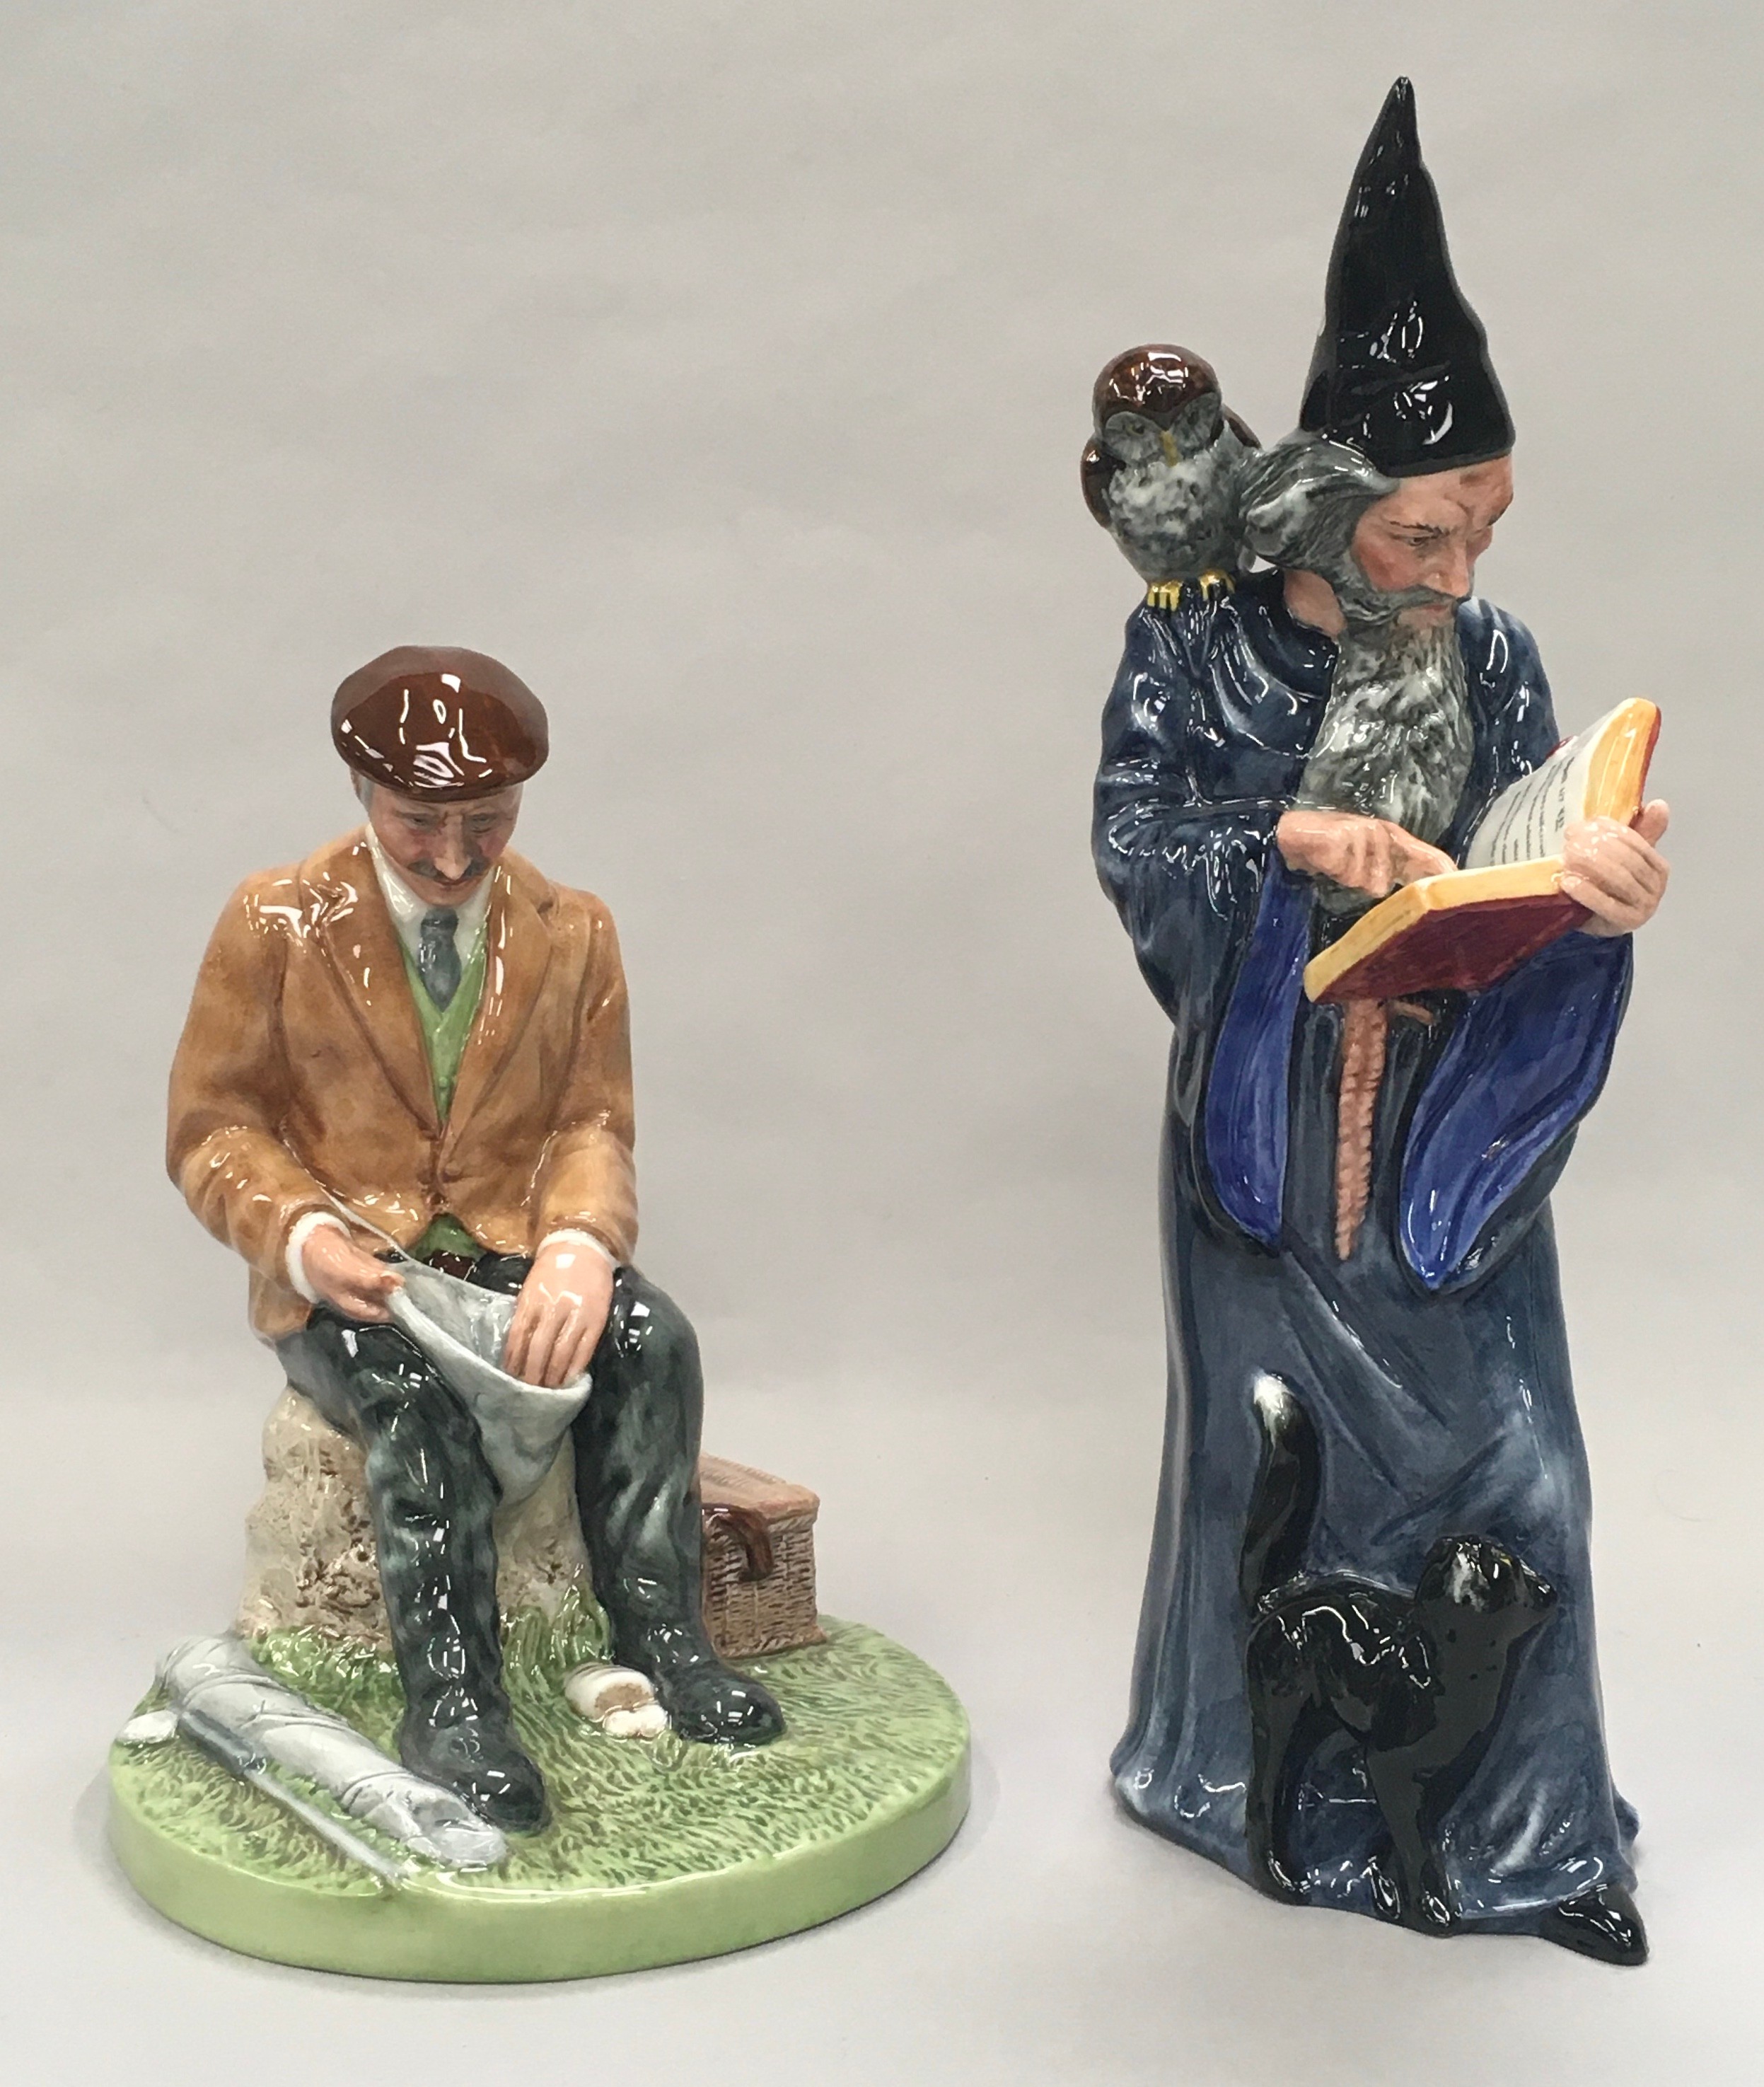 Royal Doulton figurine The Wizard HN2877 together with The Fisherman HN4511, Boxed - Image 2 of 6